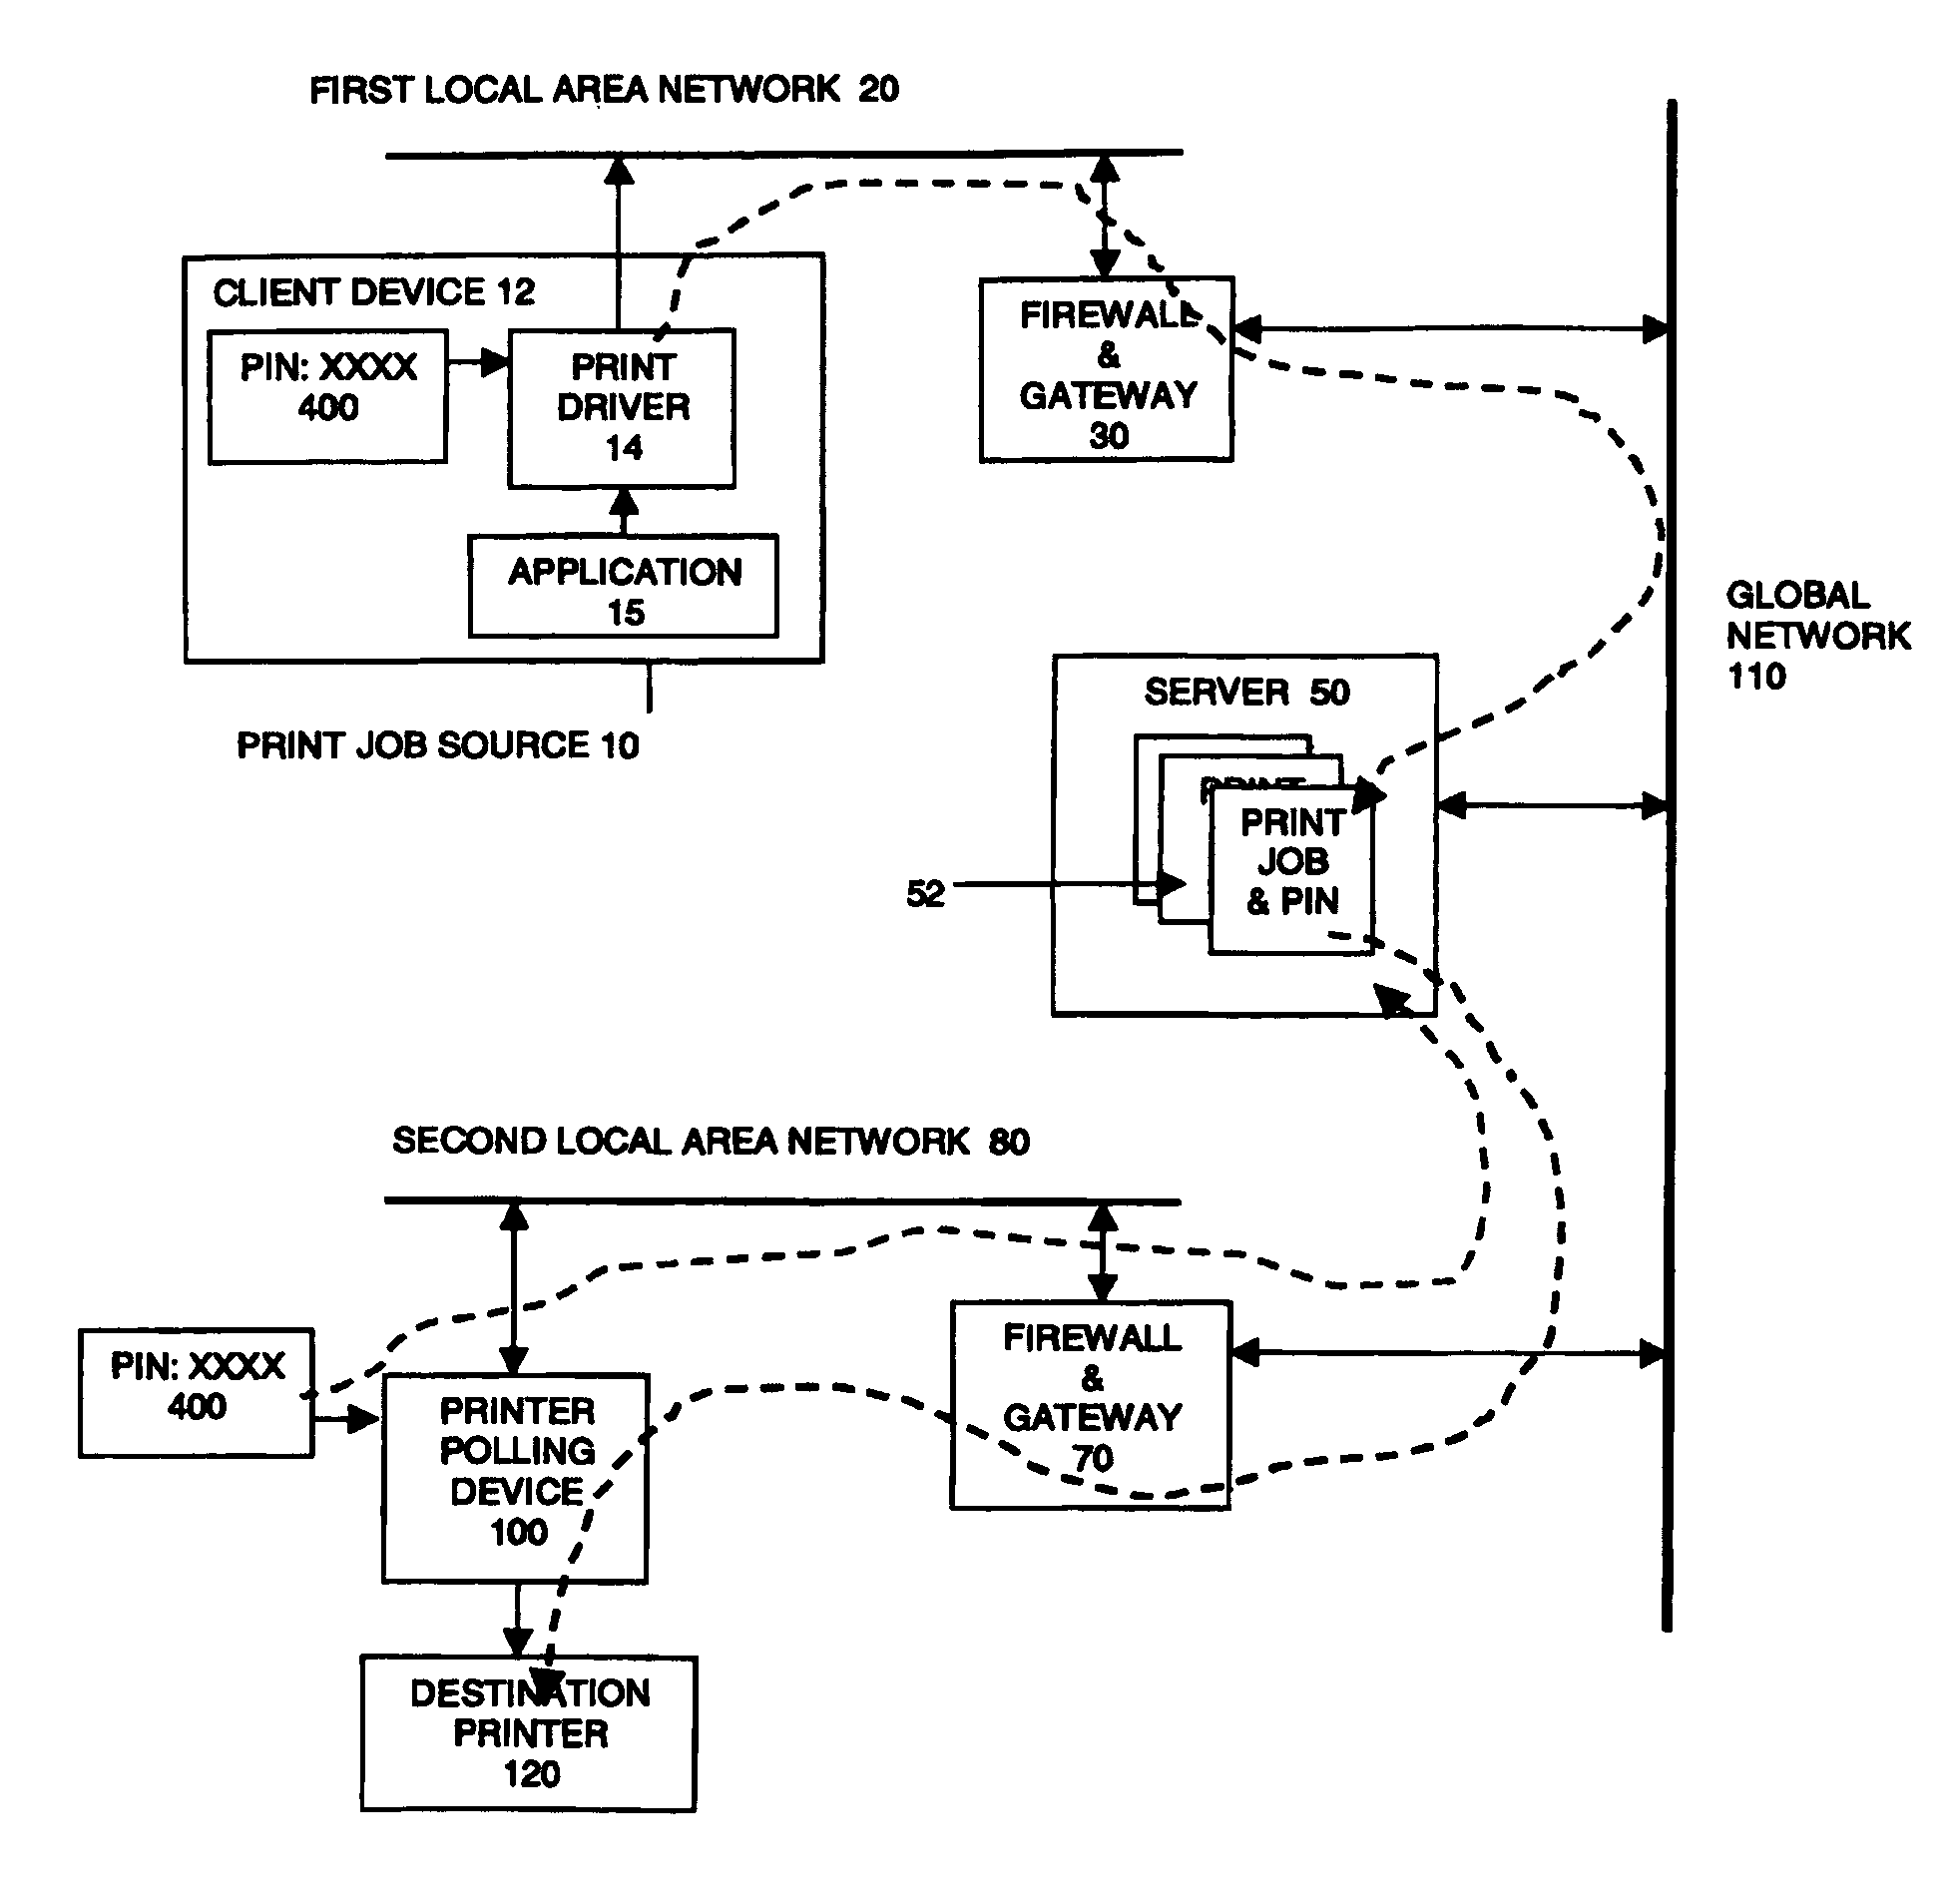 Spooling server apparatus and methods for receiving, storing, and forwarding a print job over a network